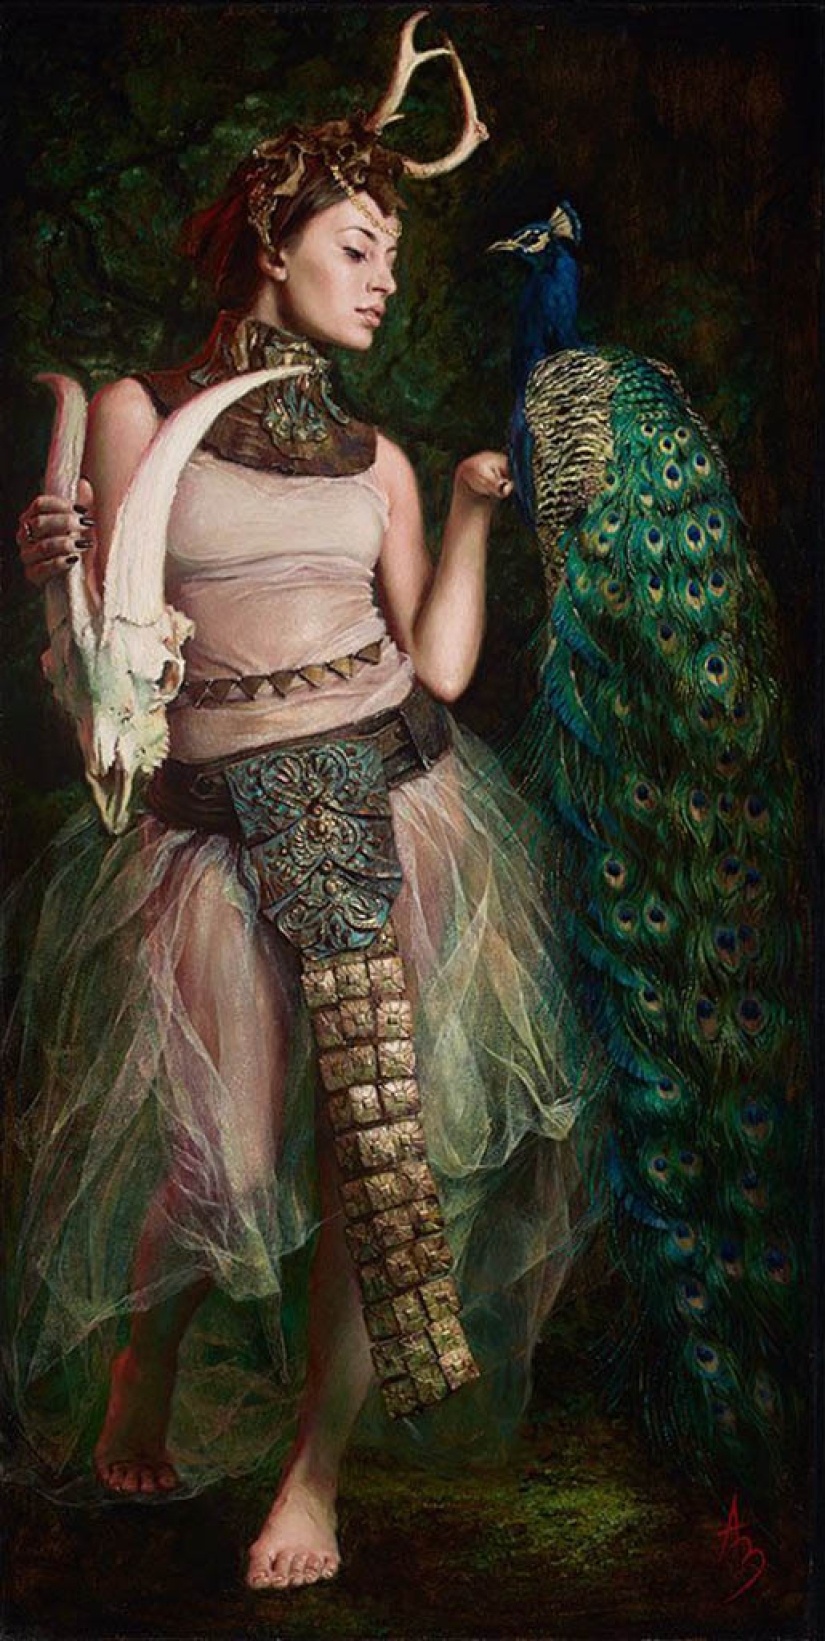 Alexandra Manukyan's Surrealism – the inner world splashed out on the canvas